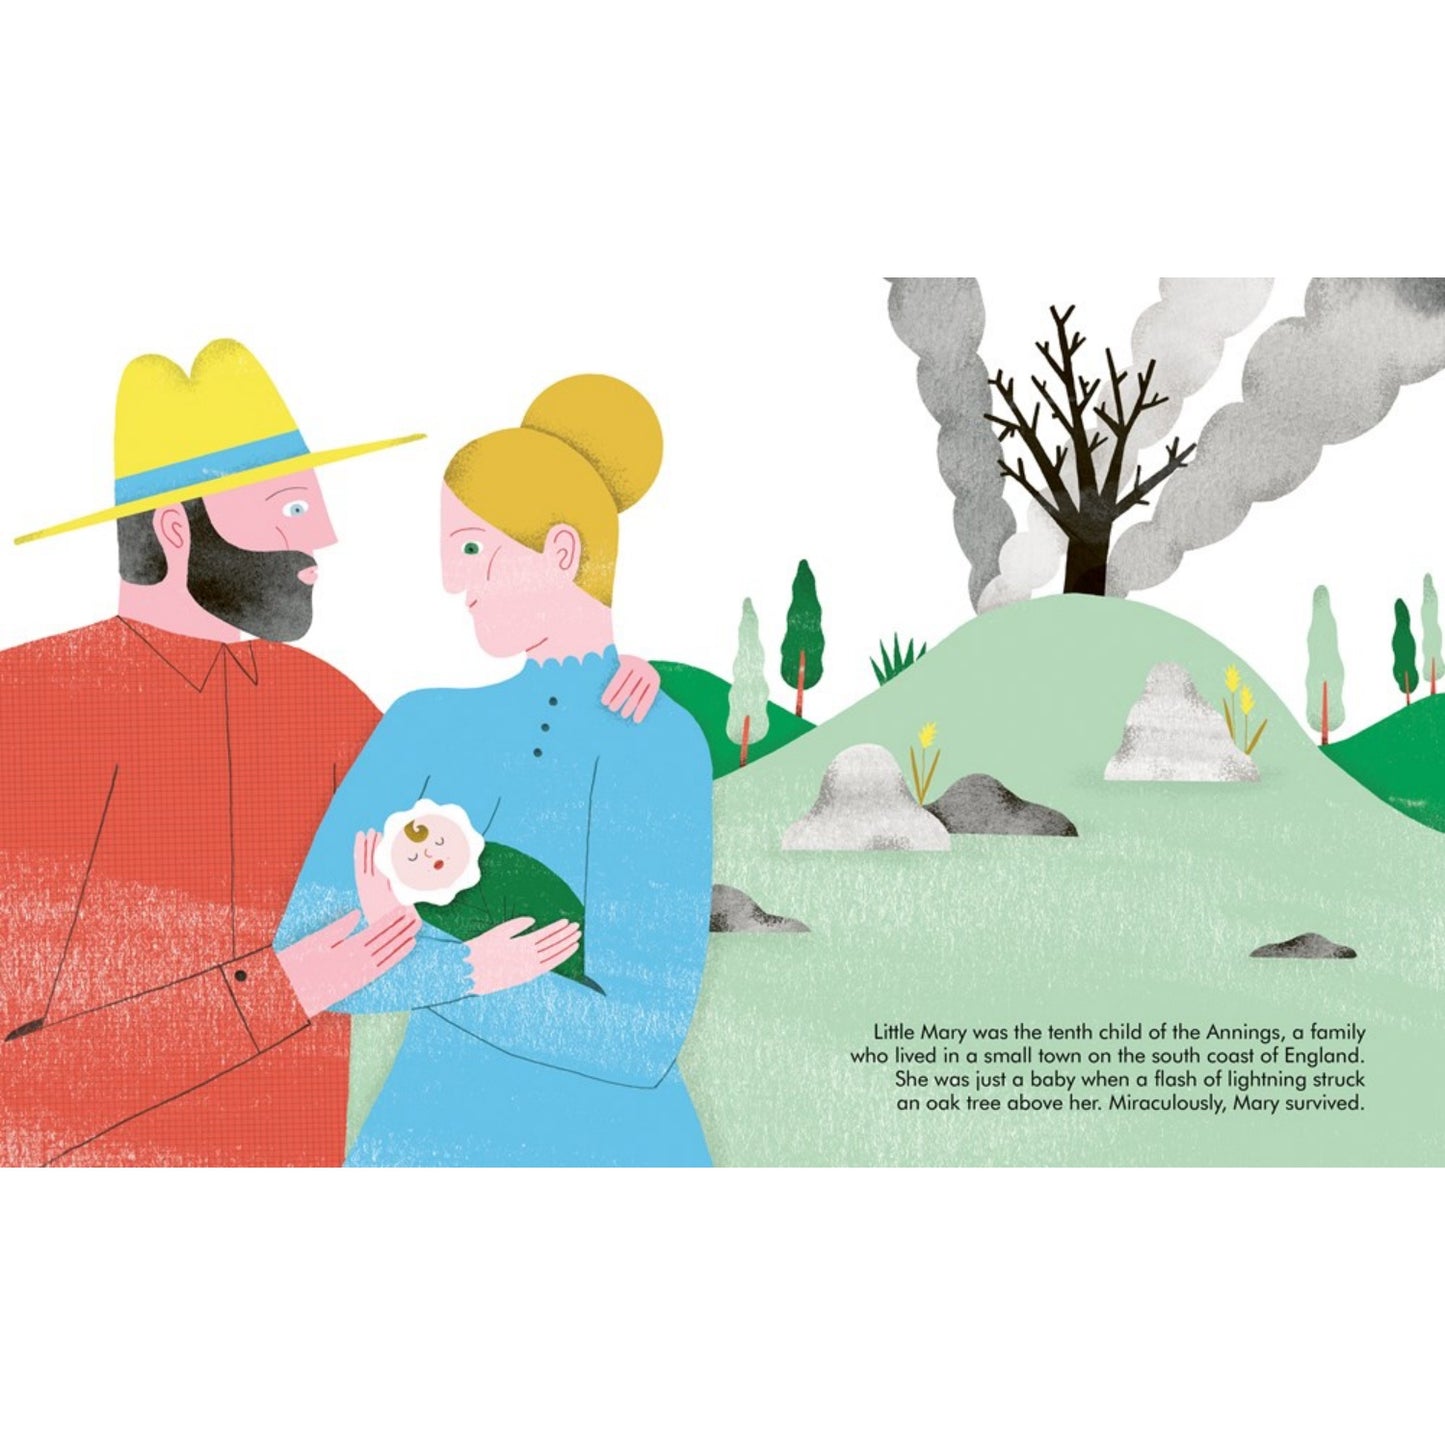 Mary Anning | Little People, BIG DREAMS | Children’s Book on Biographies